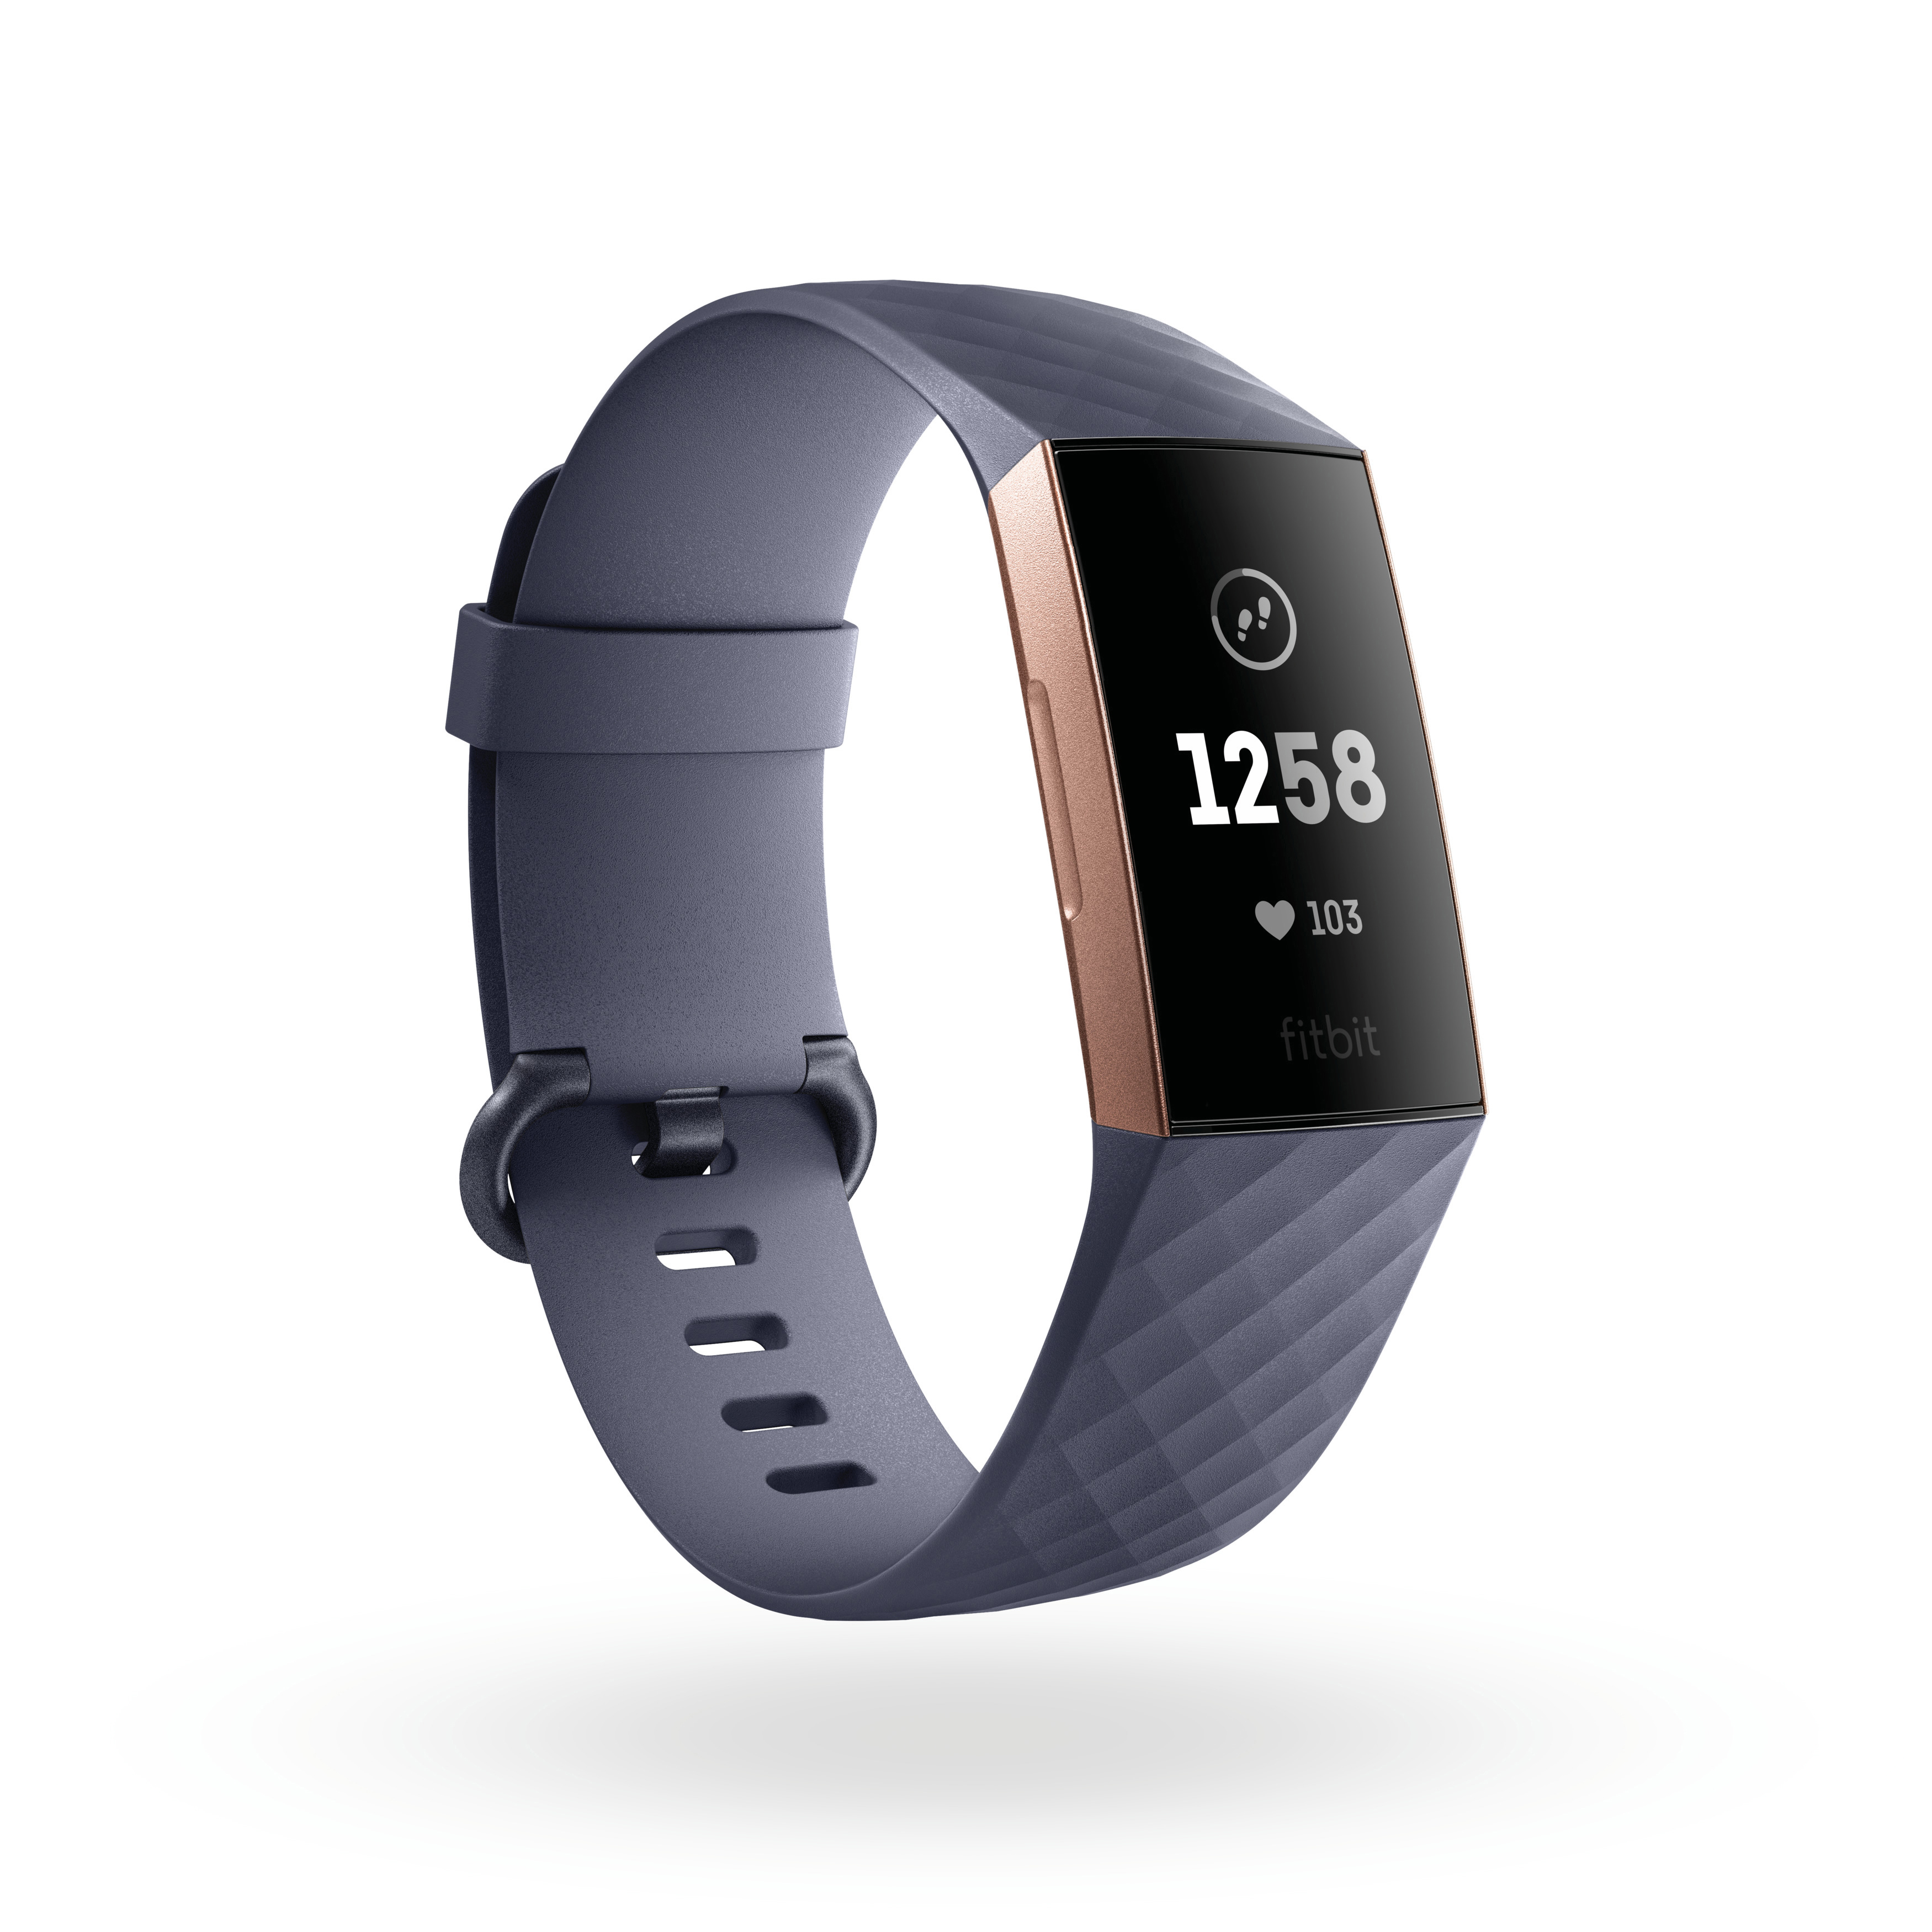 180 L: mm Grau 140 Rose - Tracker, Gold Charge Band: - / mm, 180mm Blau FITBIT 3, S: Fitness Gehäuse: mm, 220